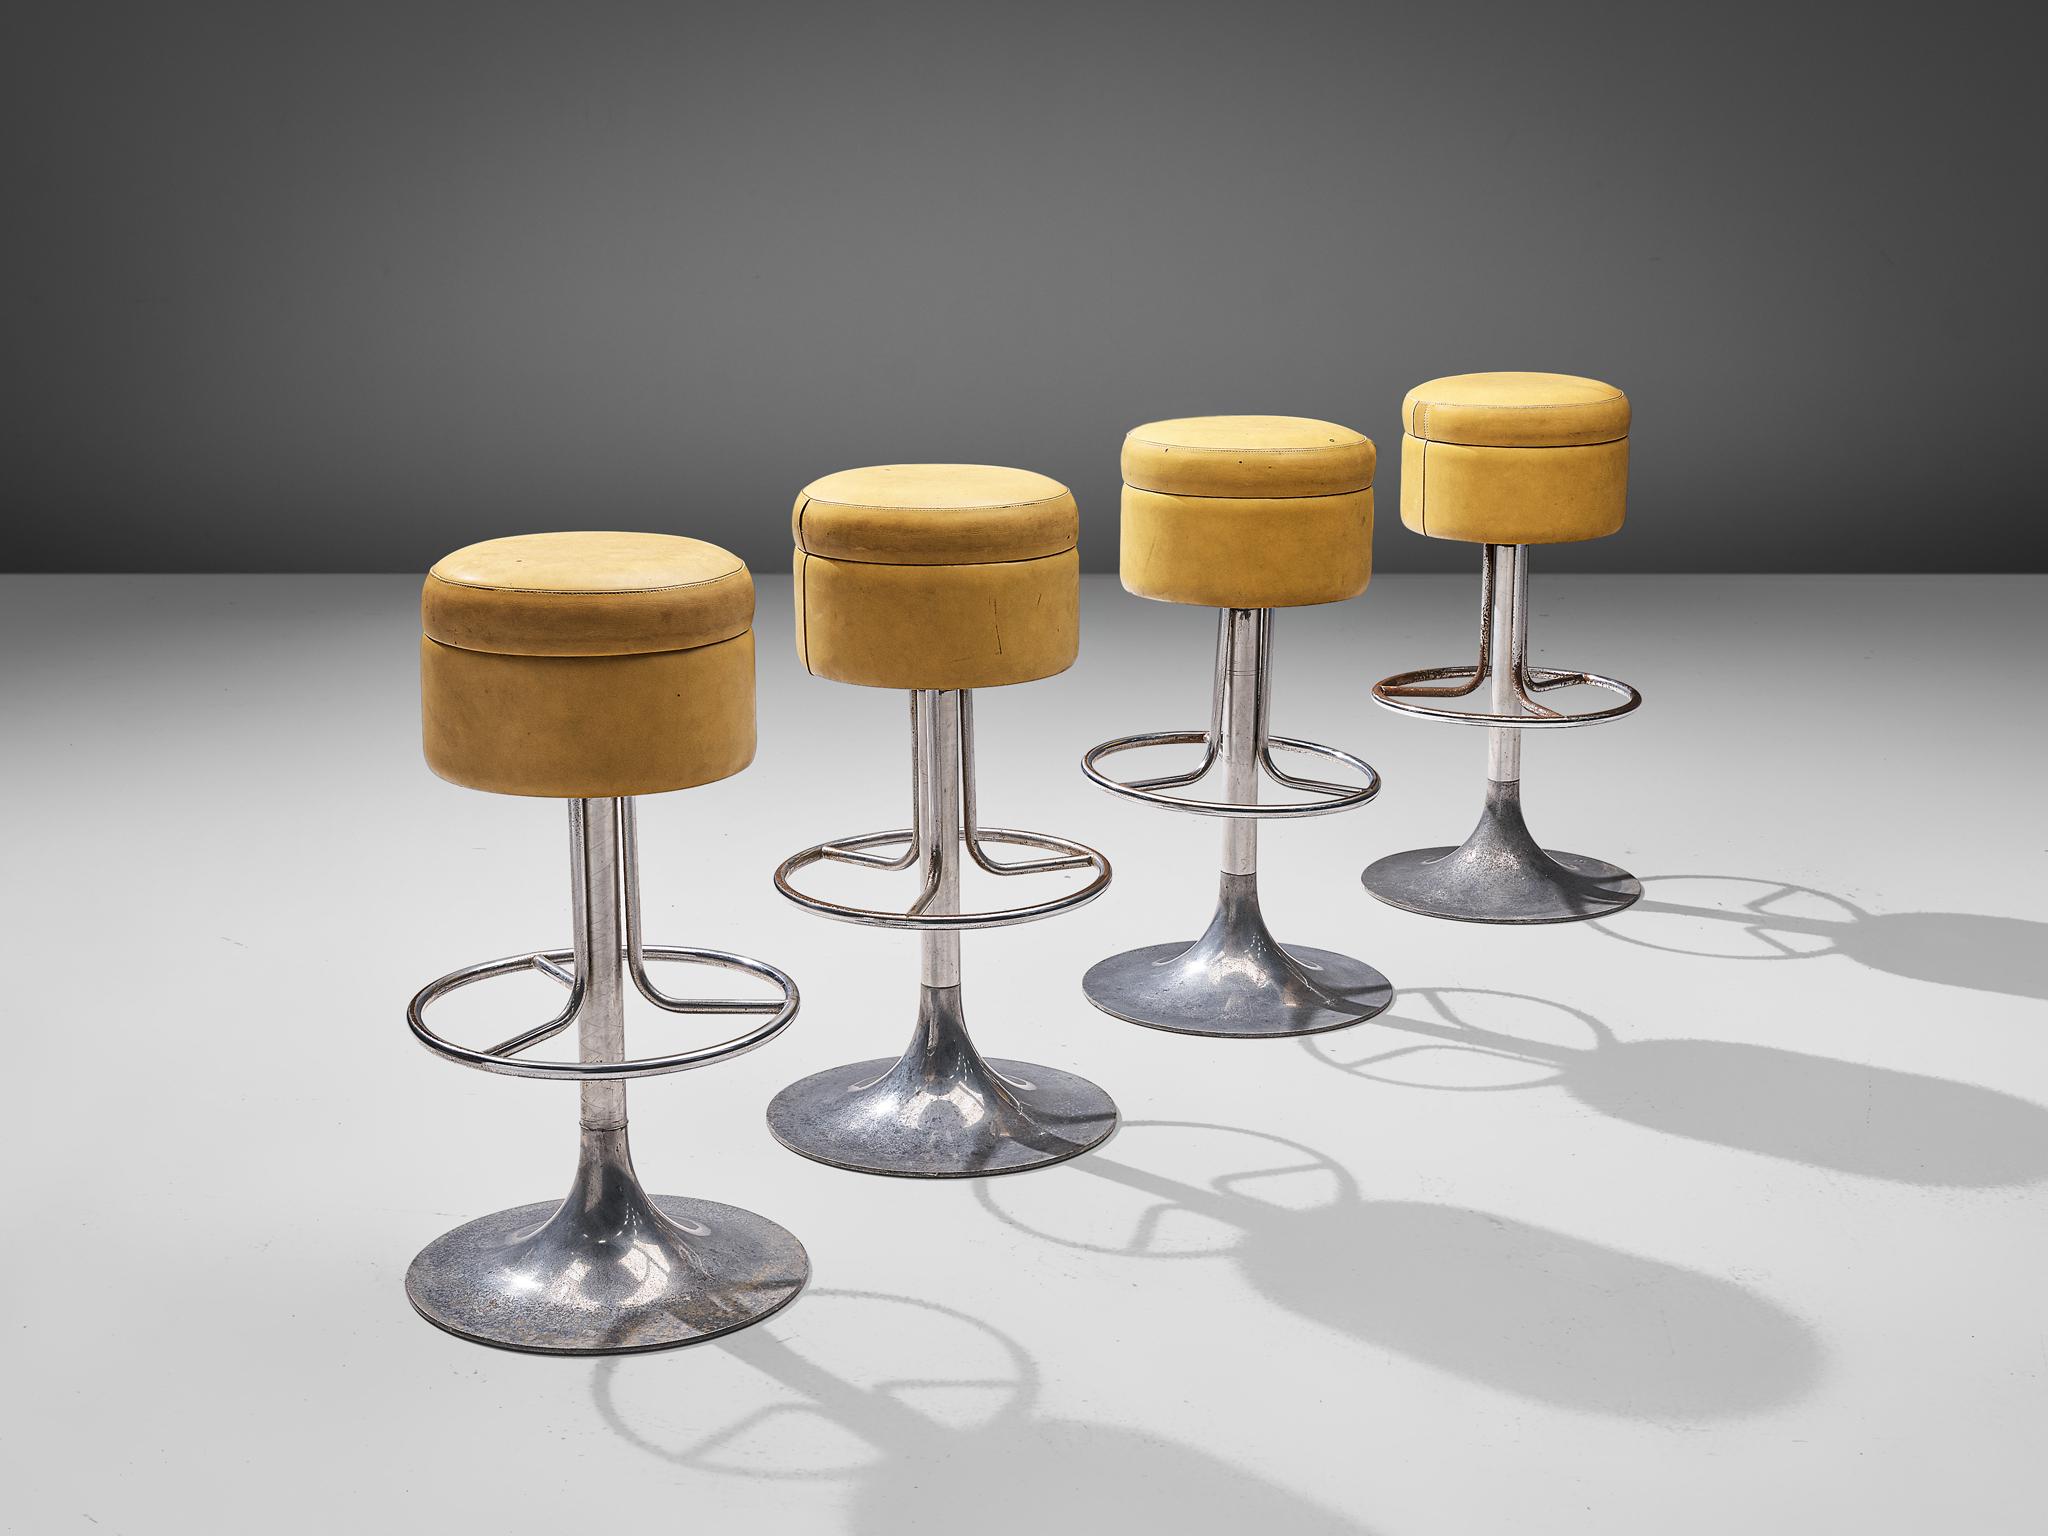 Set of four barstools, metal and leatherette, Italy, 1970s

A functional set of four Italian bar stools with an ochre yellow leatherette upholstery. The rounded seats have swivel function. The set is perfect for seating at a bar. The main feature